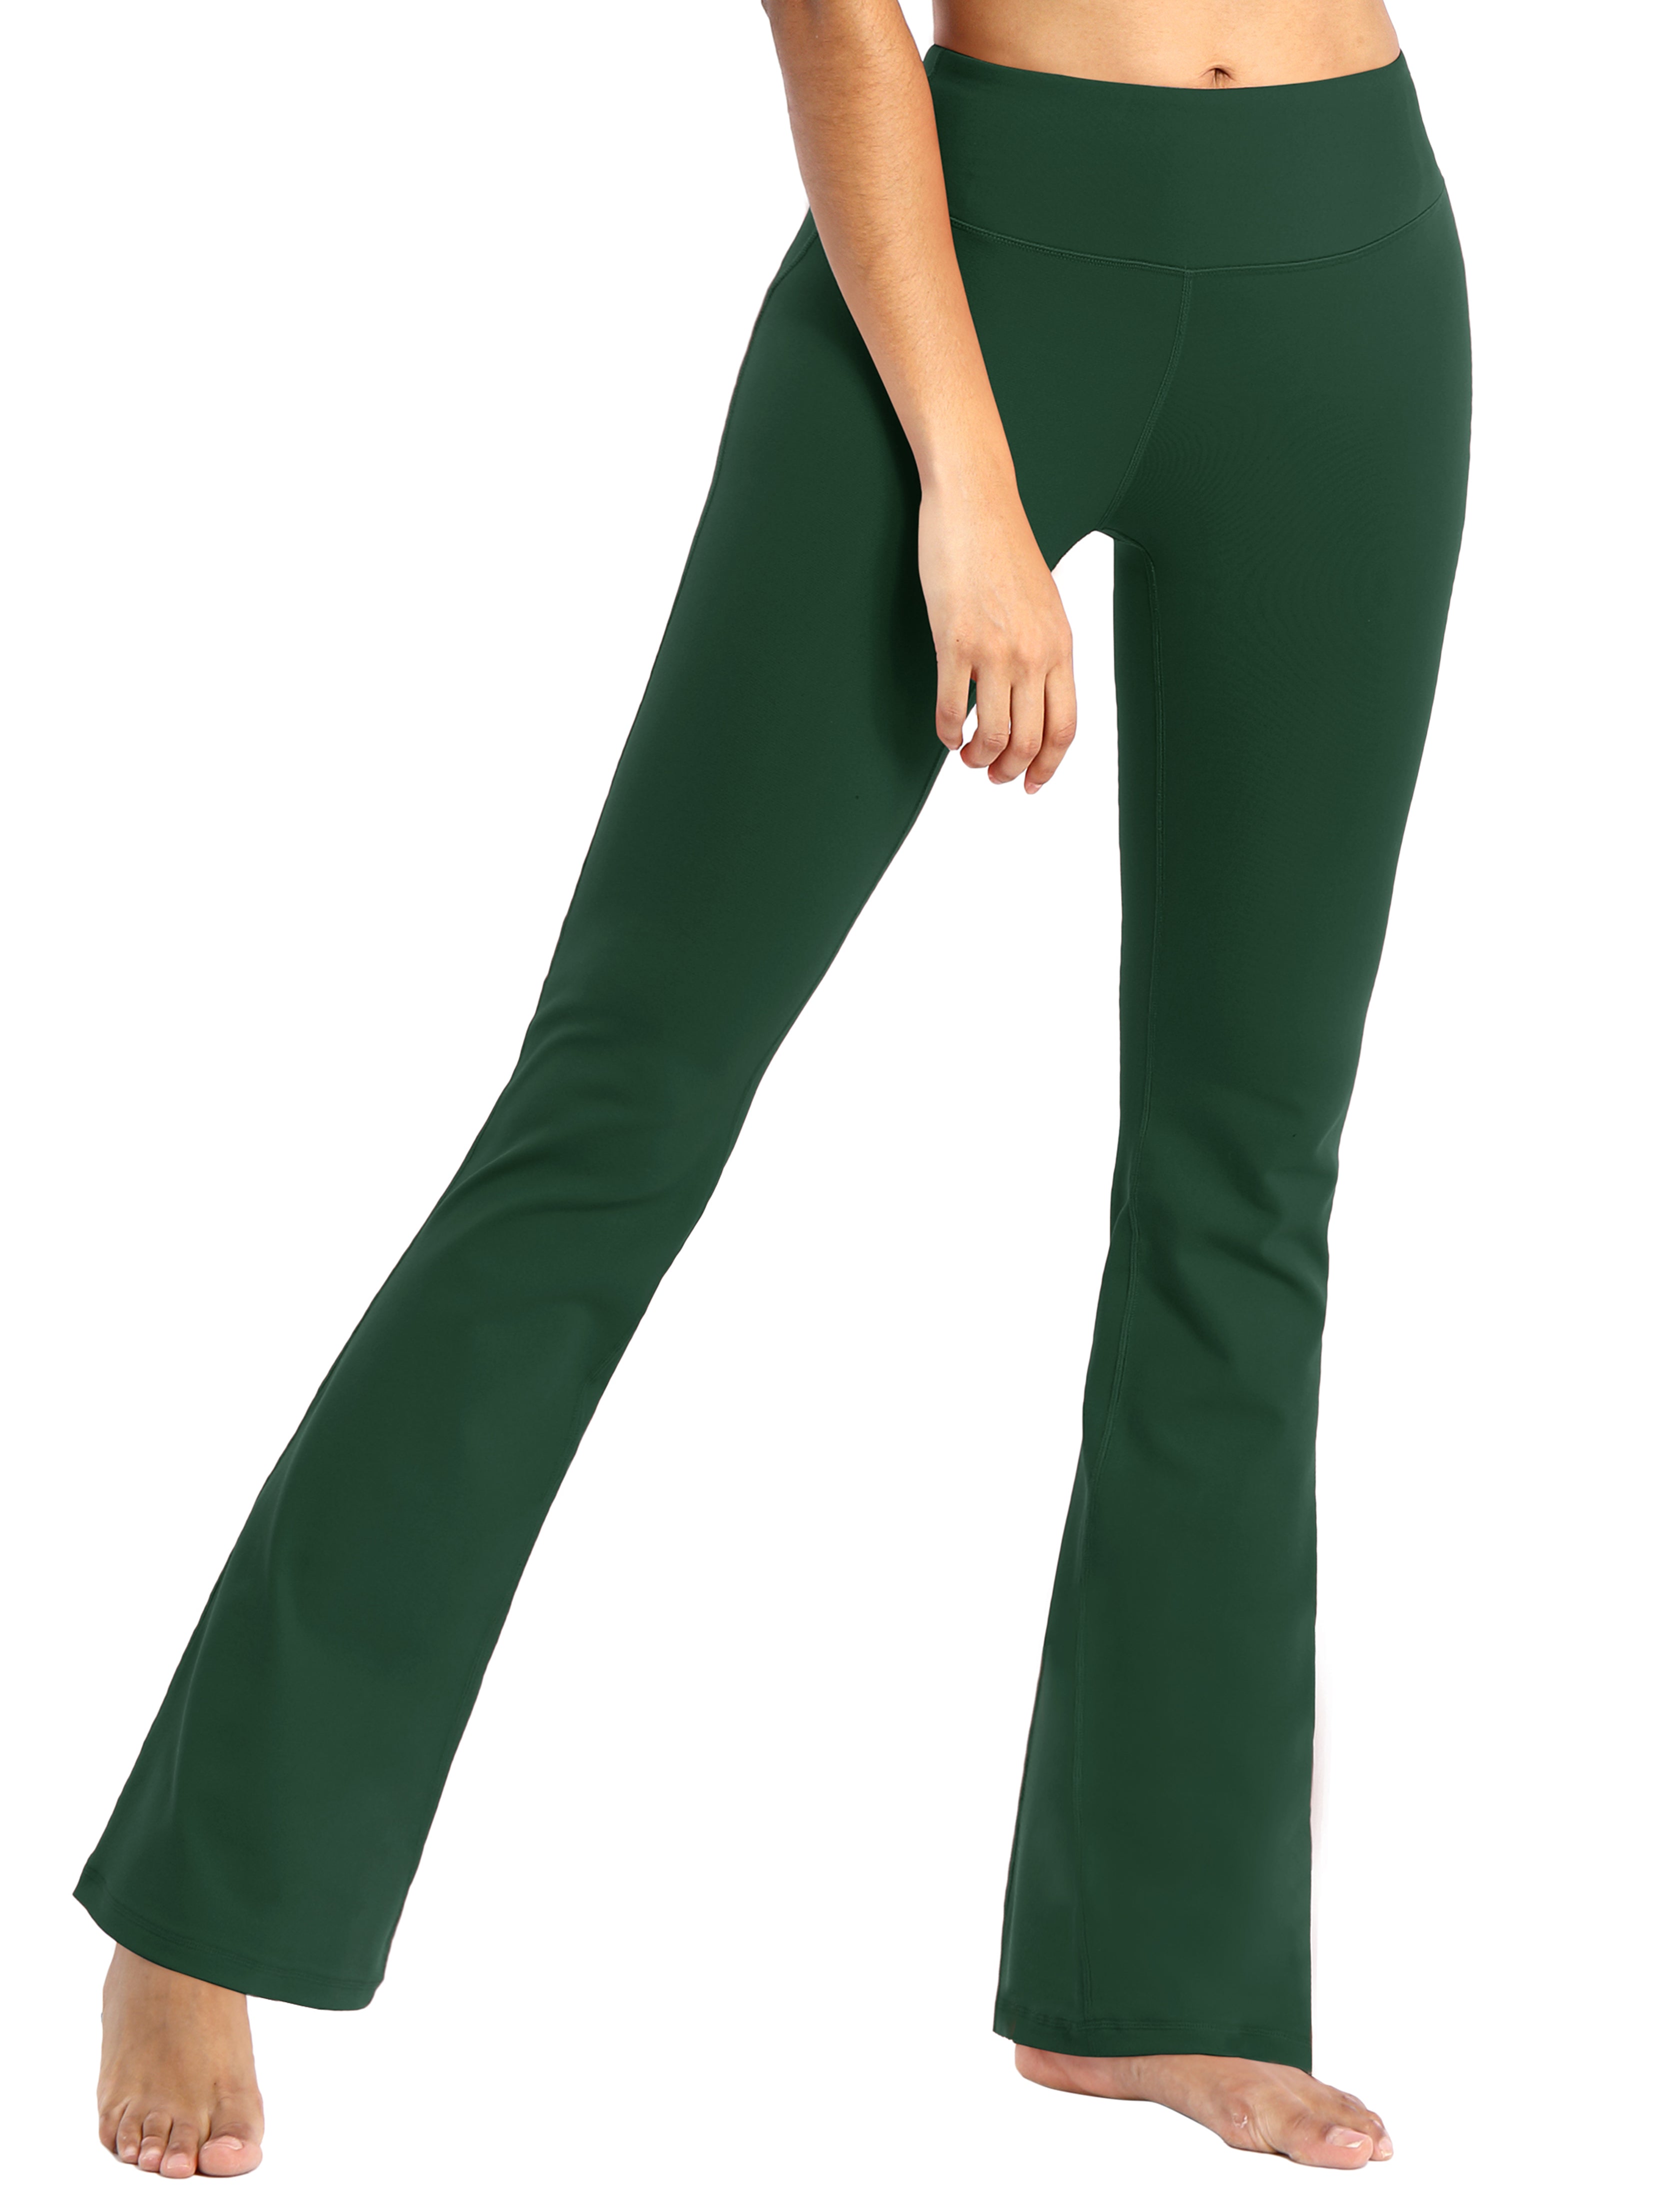 Cotton Nylon Bootcut Leggings olivegreen 87%Nylon/13%Spandex (Super soft, cotton feel , 280gsm) Fabric doesn't attract lint easily 4-way stretch No see-through Moisture-wicking Inner pocket Four lengths